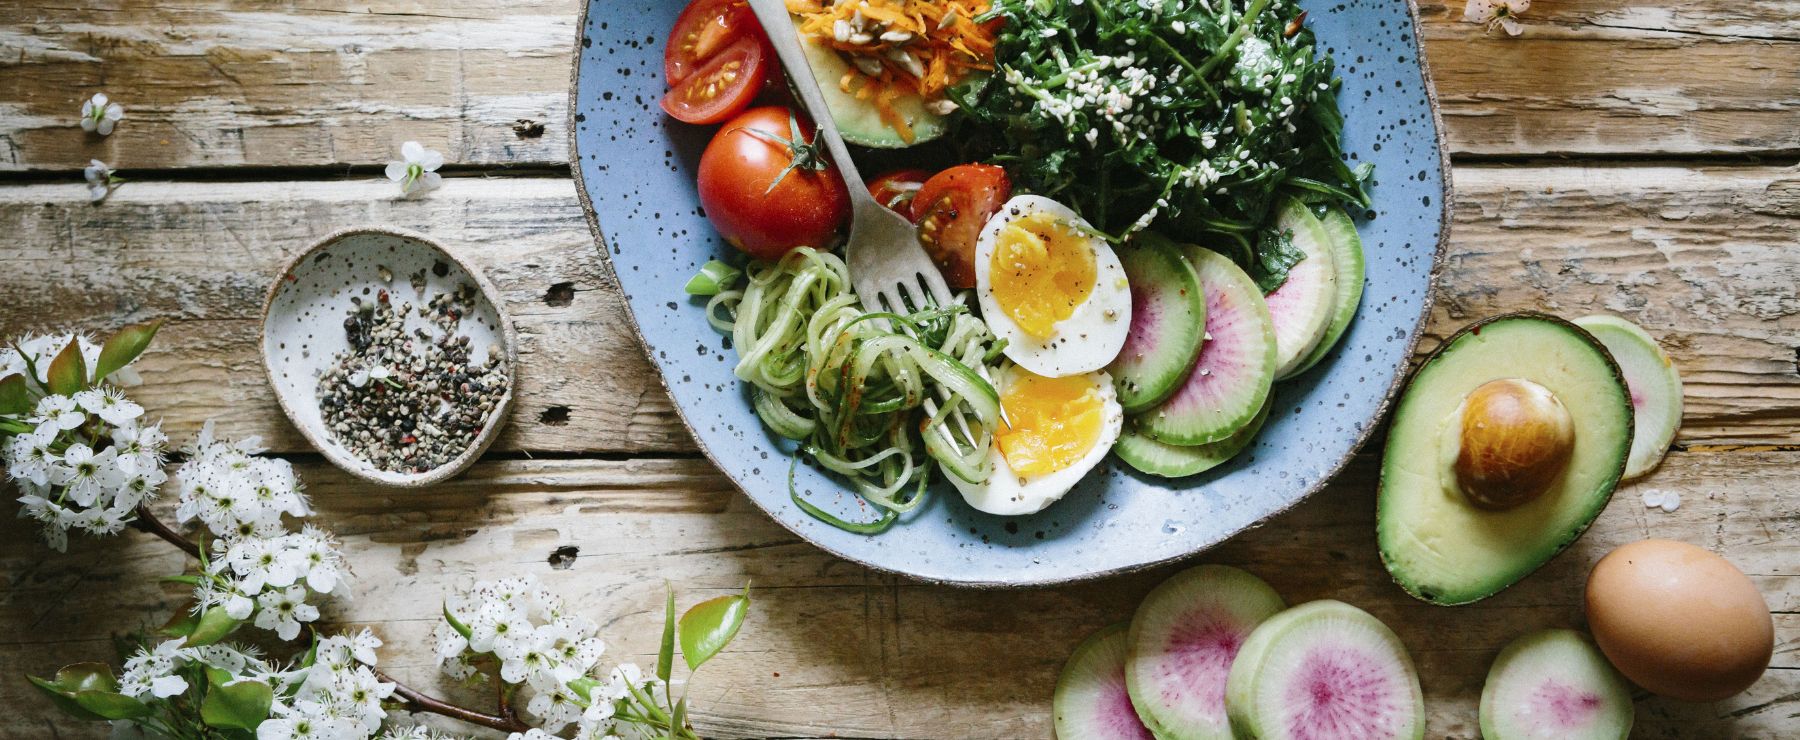 a healthy looking salad with avocado and eggs